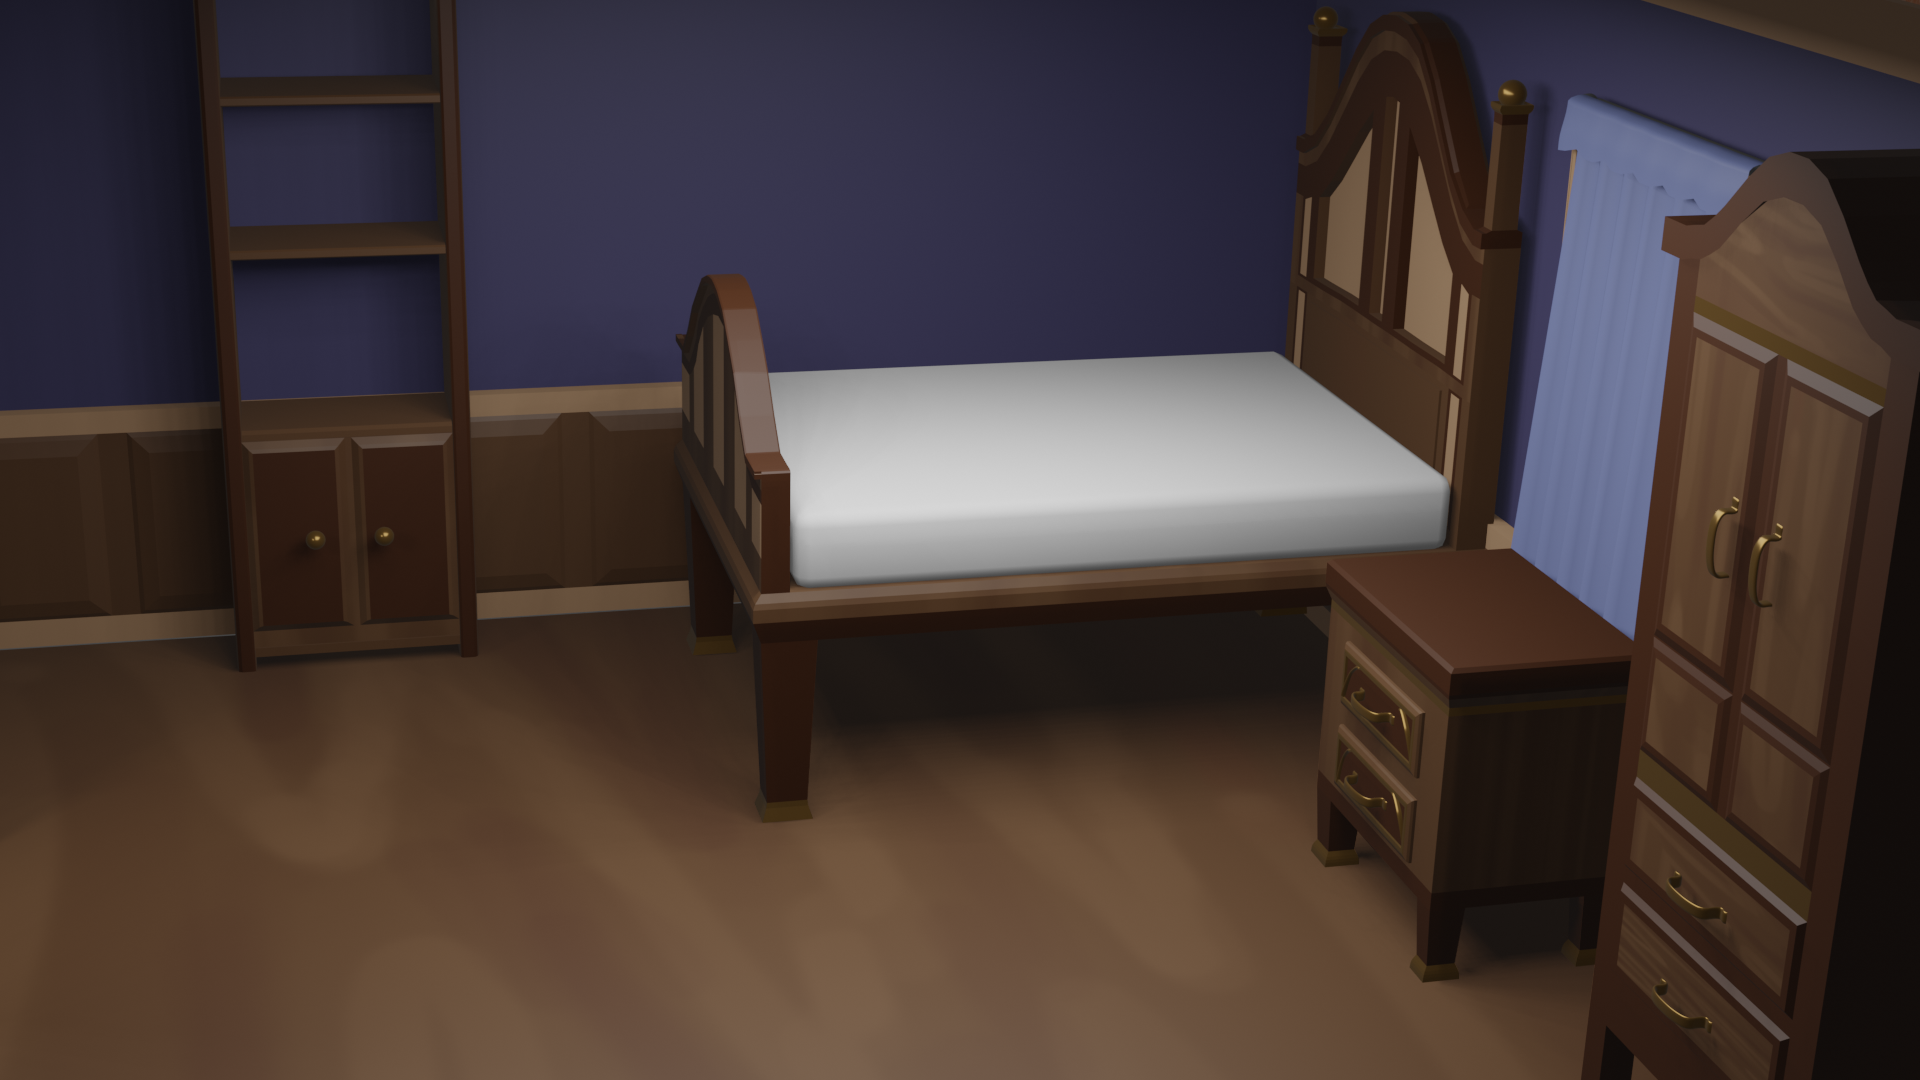 The empty bedroom from episode 26. A bed, night stand and an armoire.